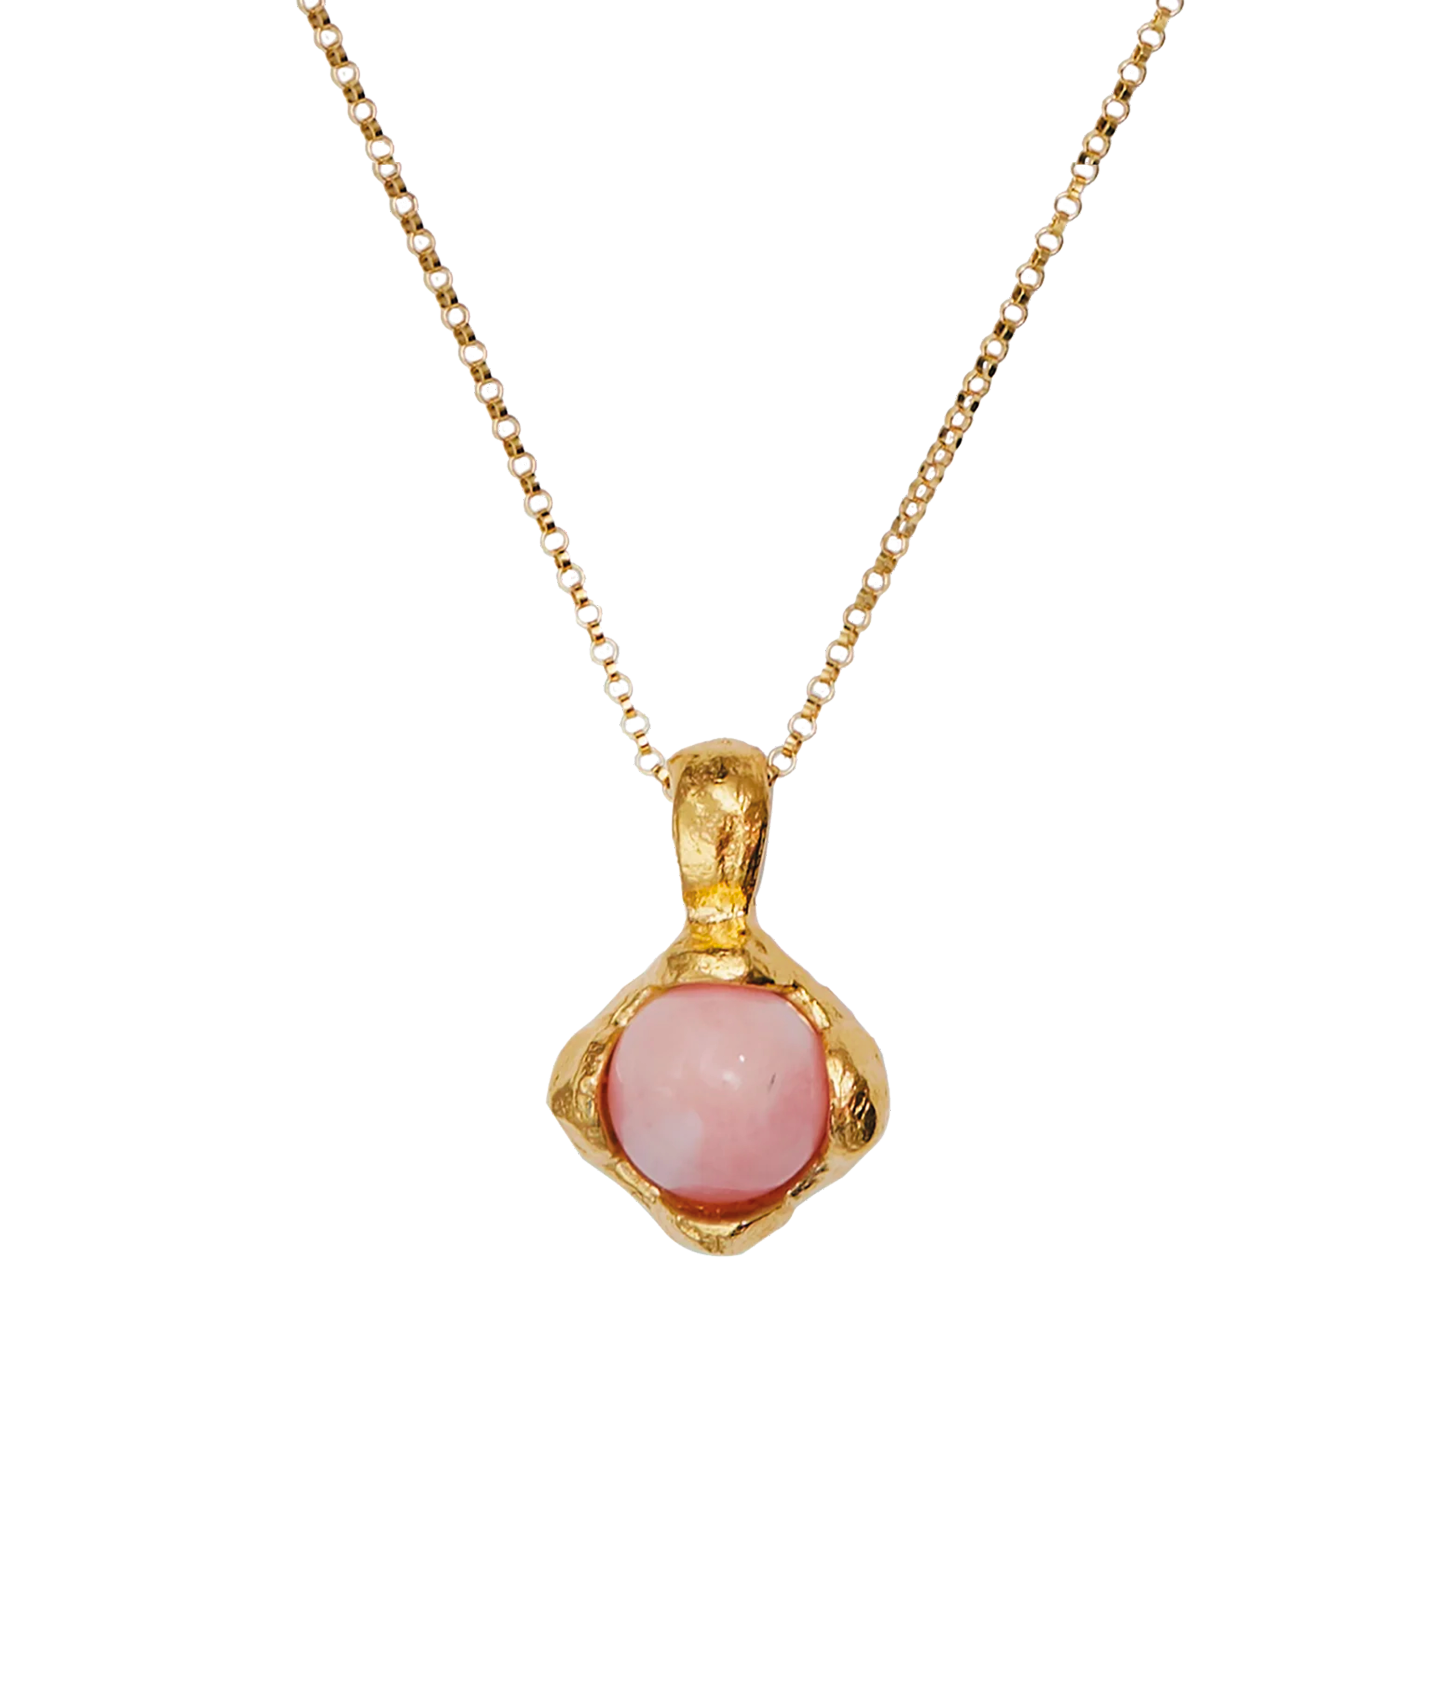 The Tramonto Opal Necklace